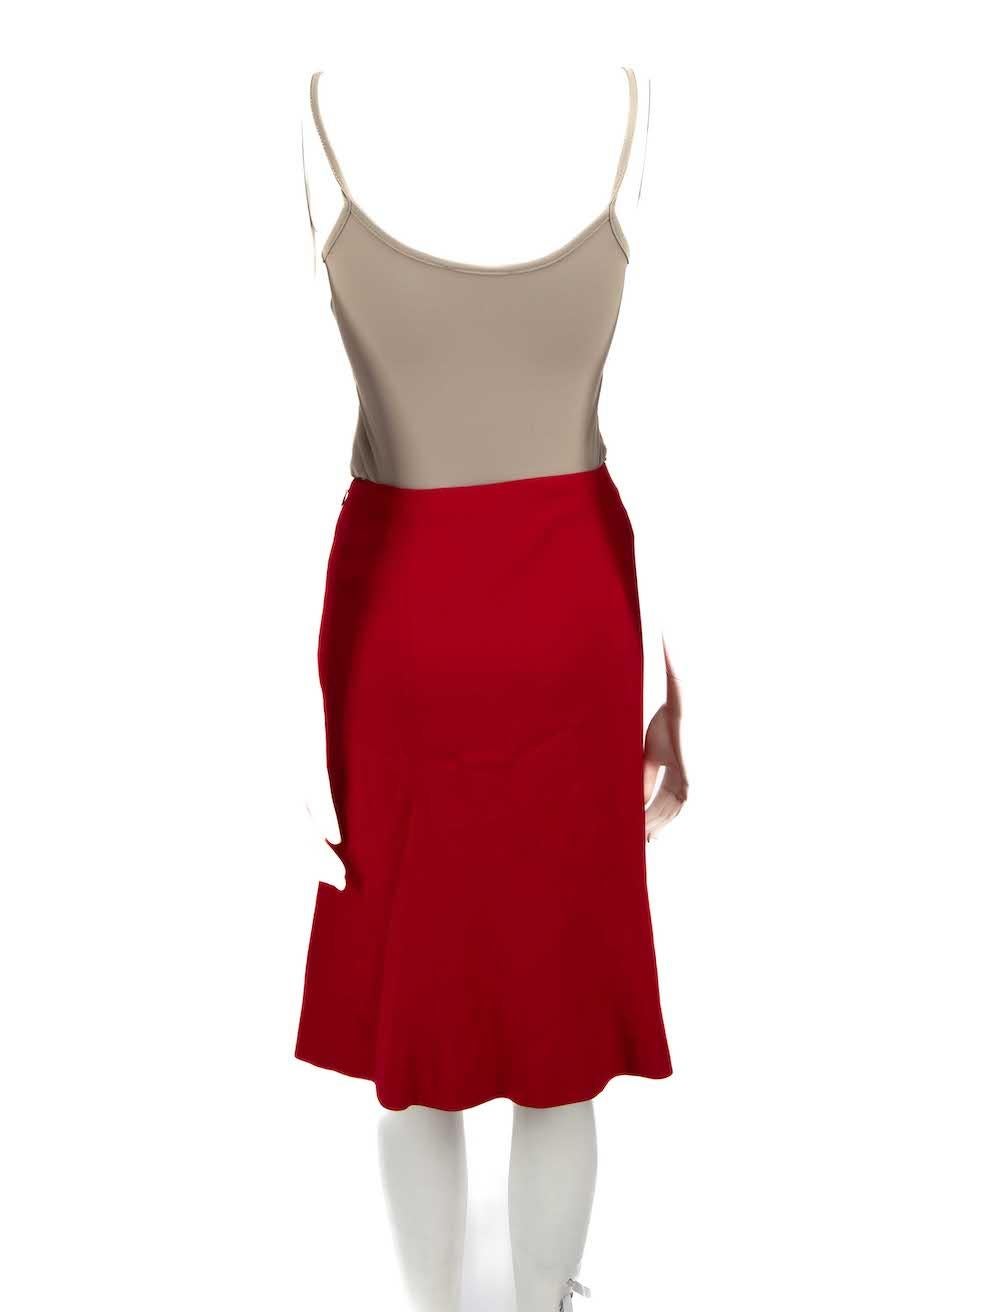 Moschino Moschino Cheap And Chic Red Flared Knee Length Skirt Size L In Good Condition For Sale In London, GB